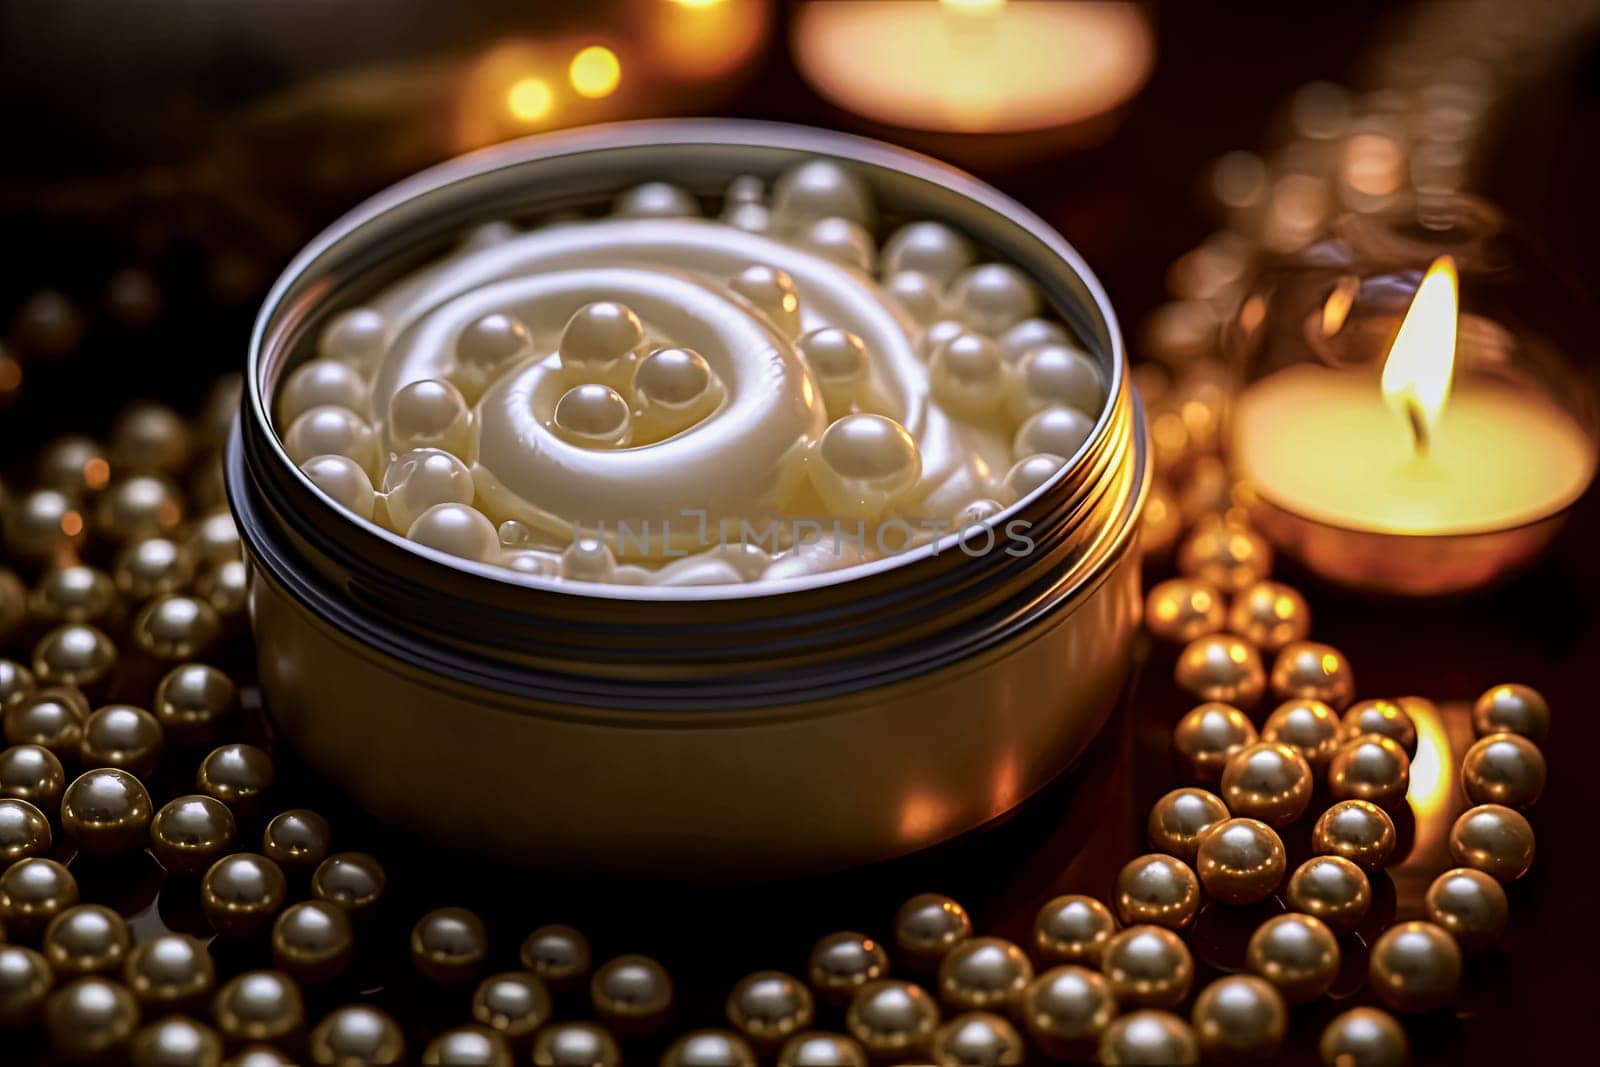 A gold-colored container filled with many white pearls, some scattered around it and others piled on top. Concept of luxury and elegance. Face cream in pearl form.